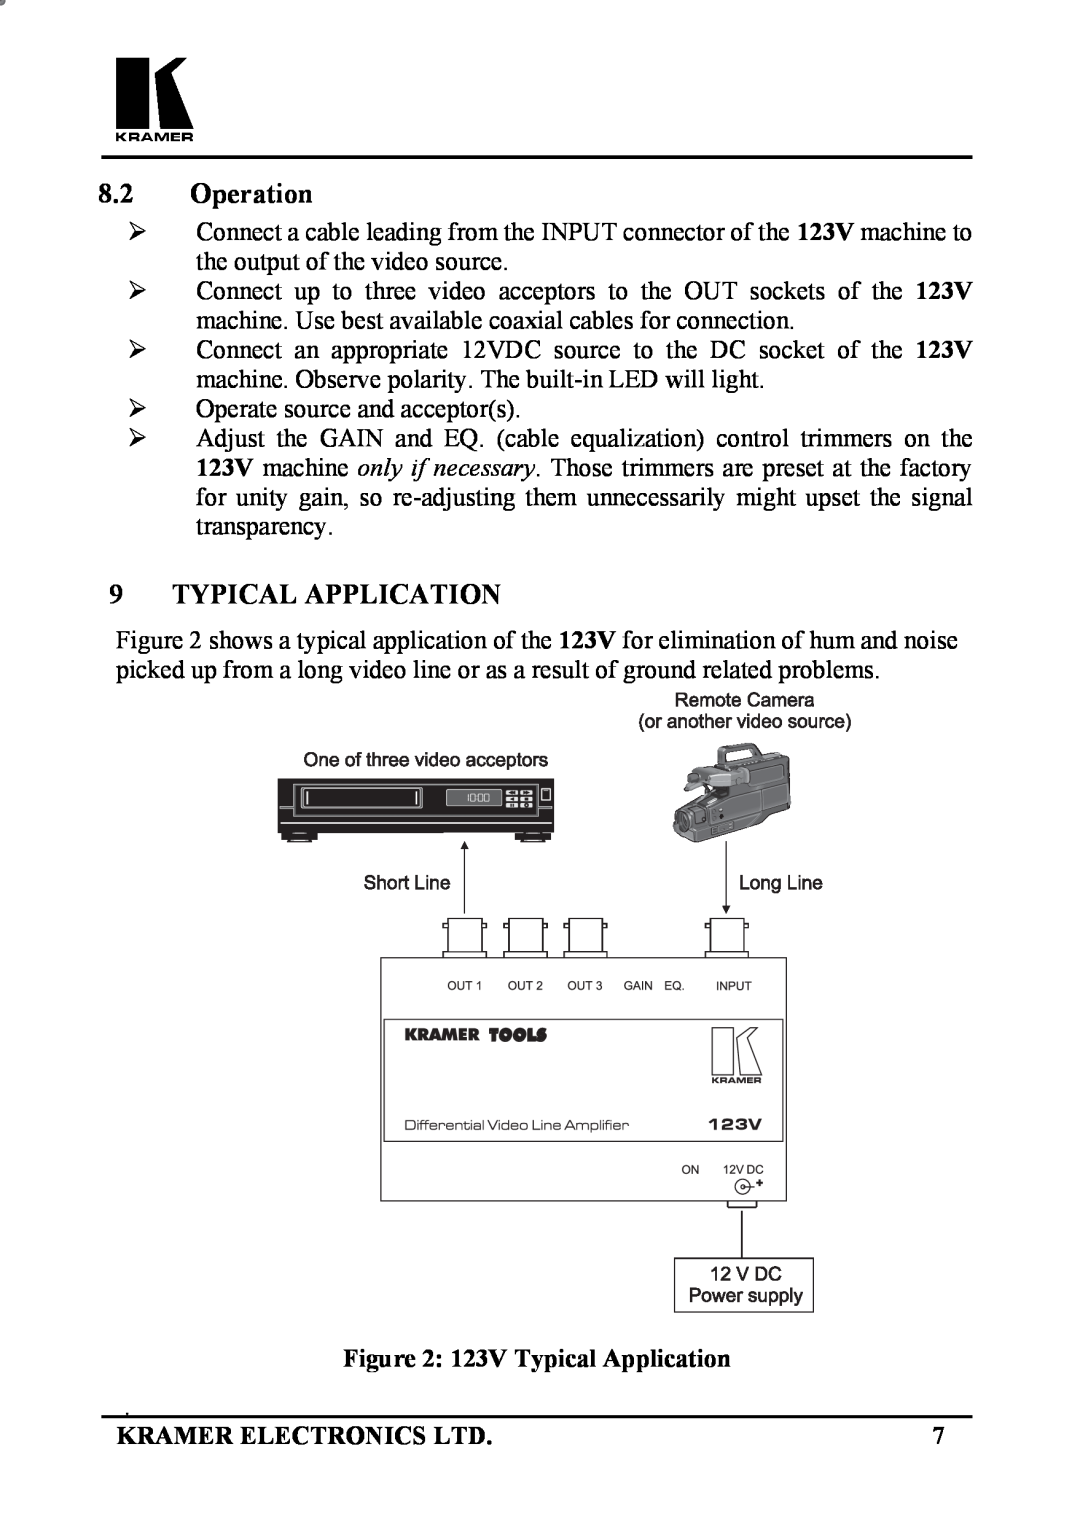 Kramer Electronics user manual the 123V machine to sockets of the, of hum and noise problems, 123V Typical Application 